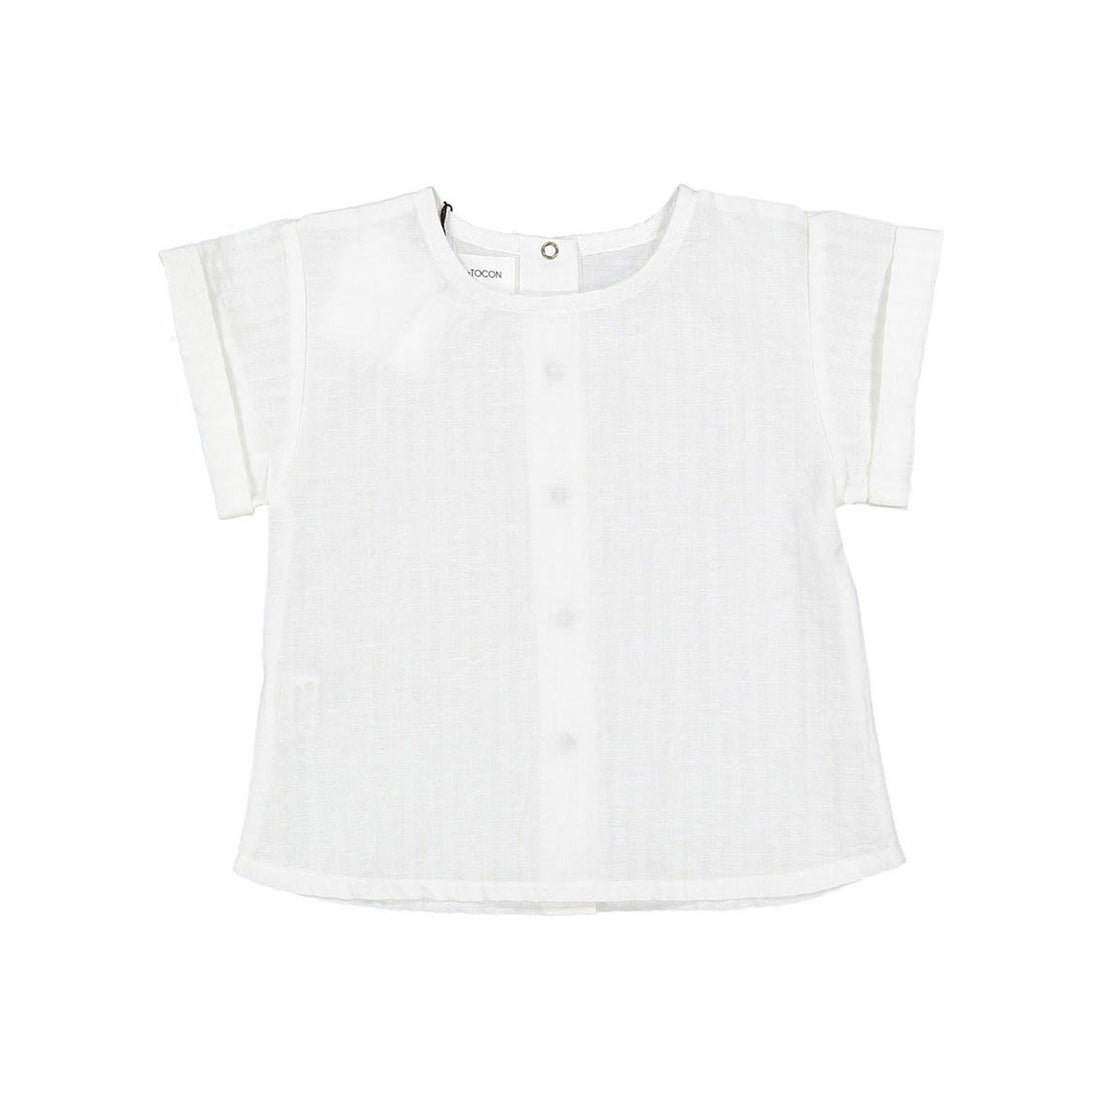 Pequeno Tocon White Baby Top